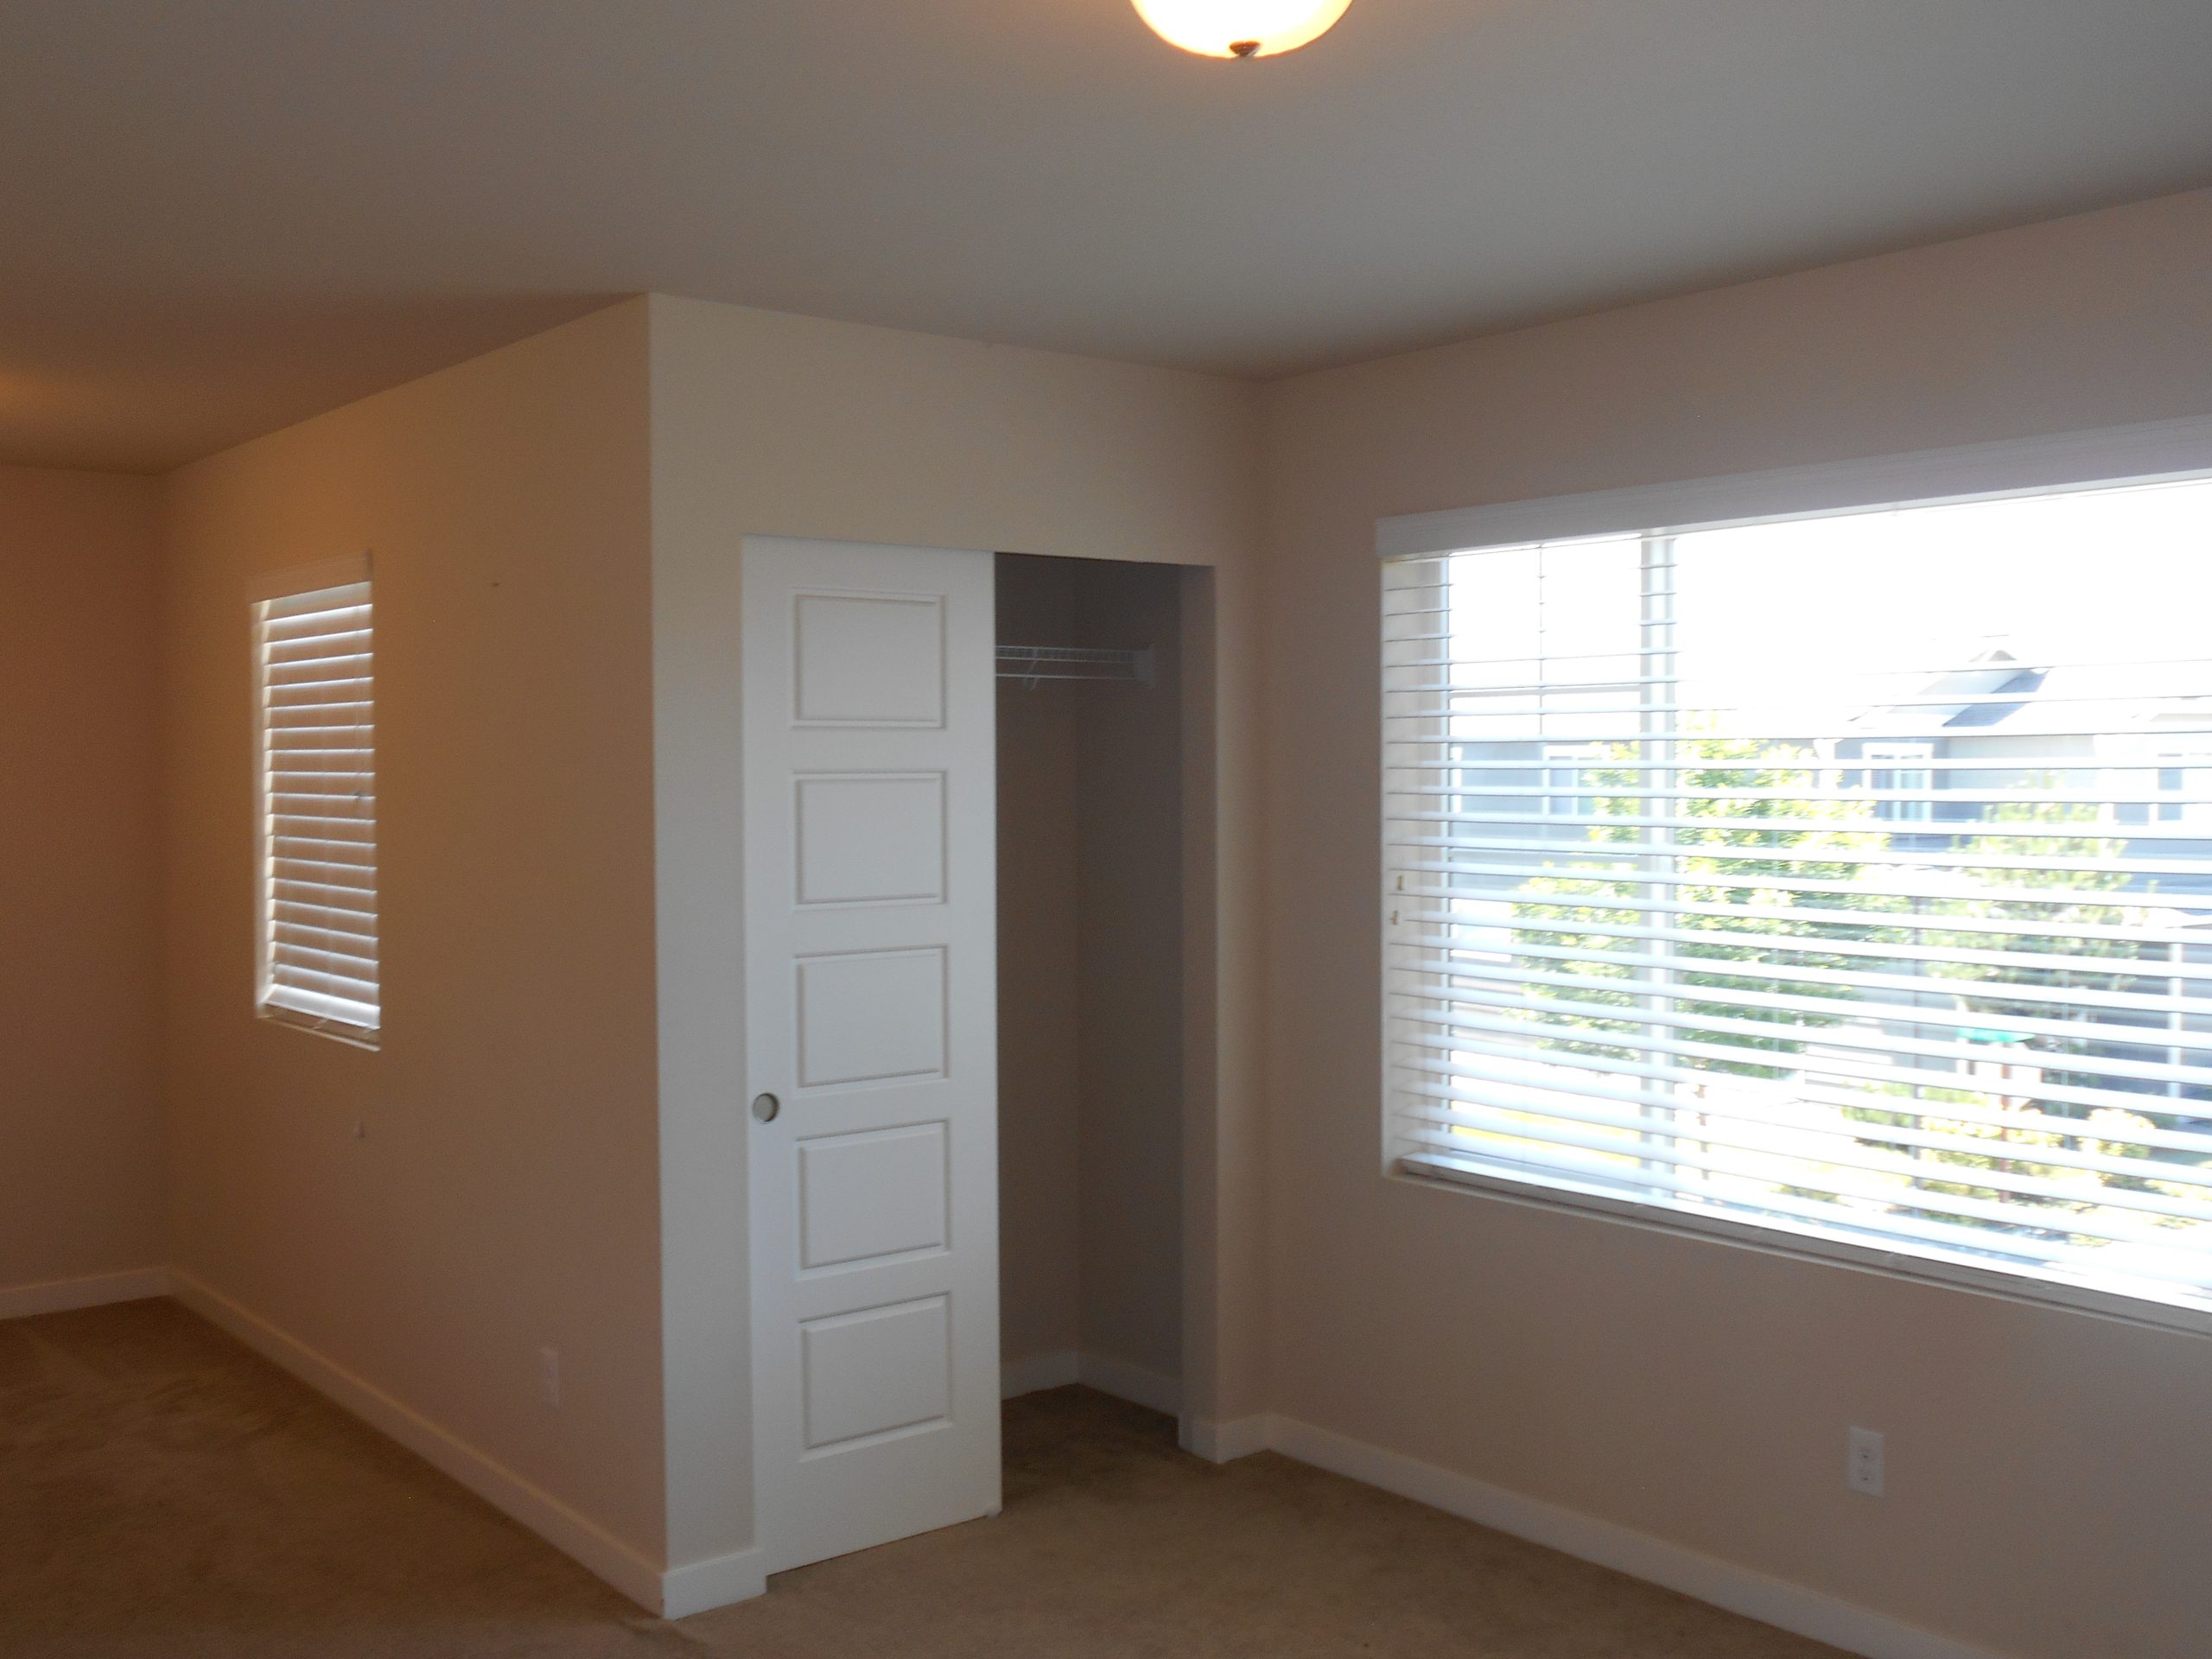 $2,295 – Picture Perfect in Puyallup! 3+ Bedrooms w/ FREE* APPLICATION FEES!